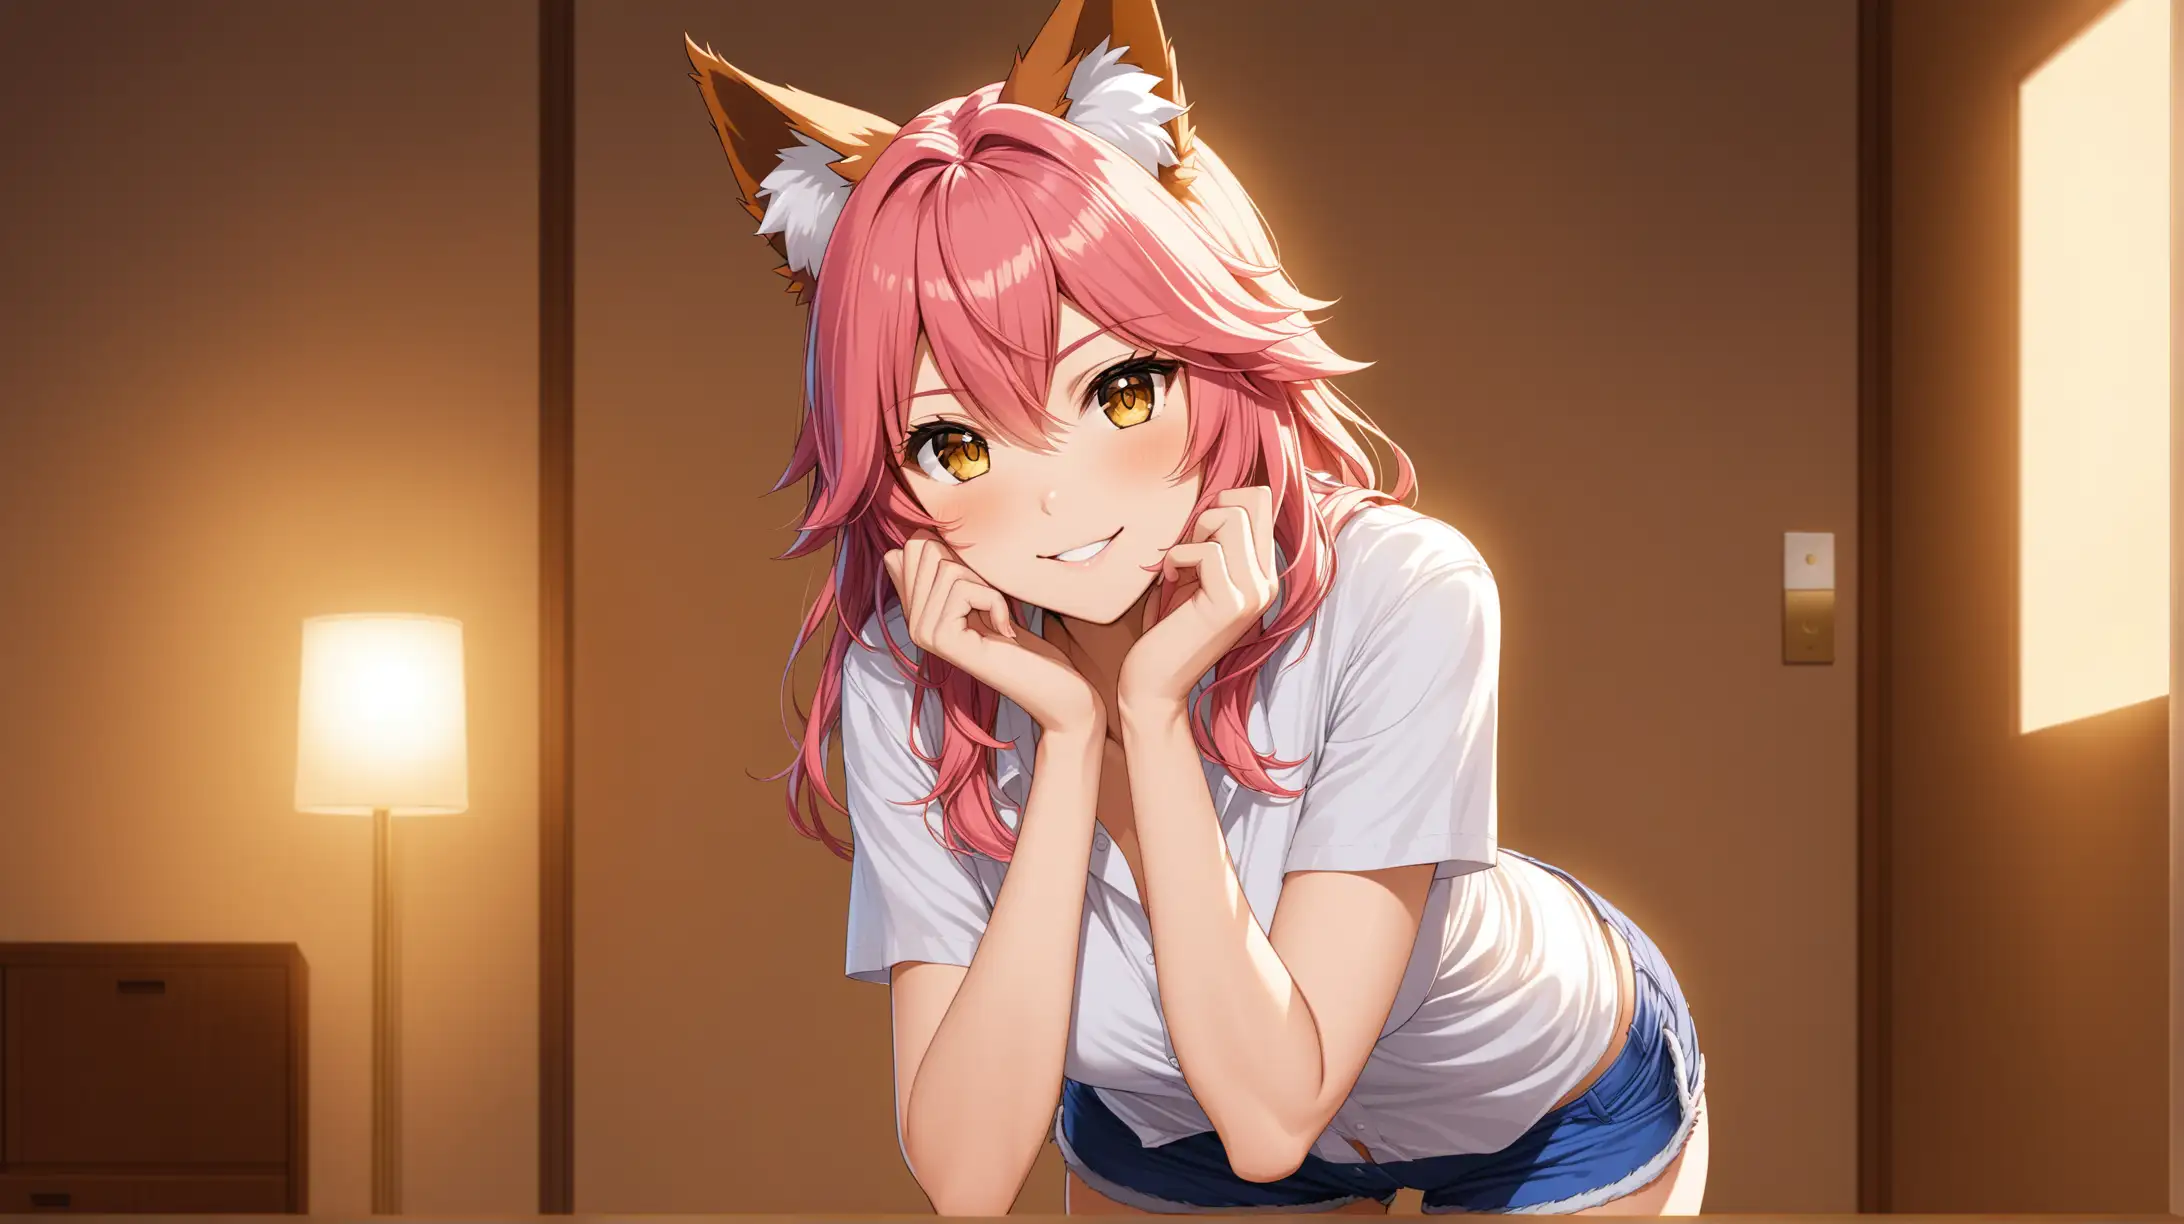 Seductive Tamamo no Mae with Pink Hair in Ambient Lighting